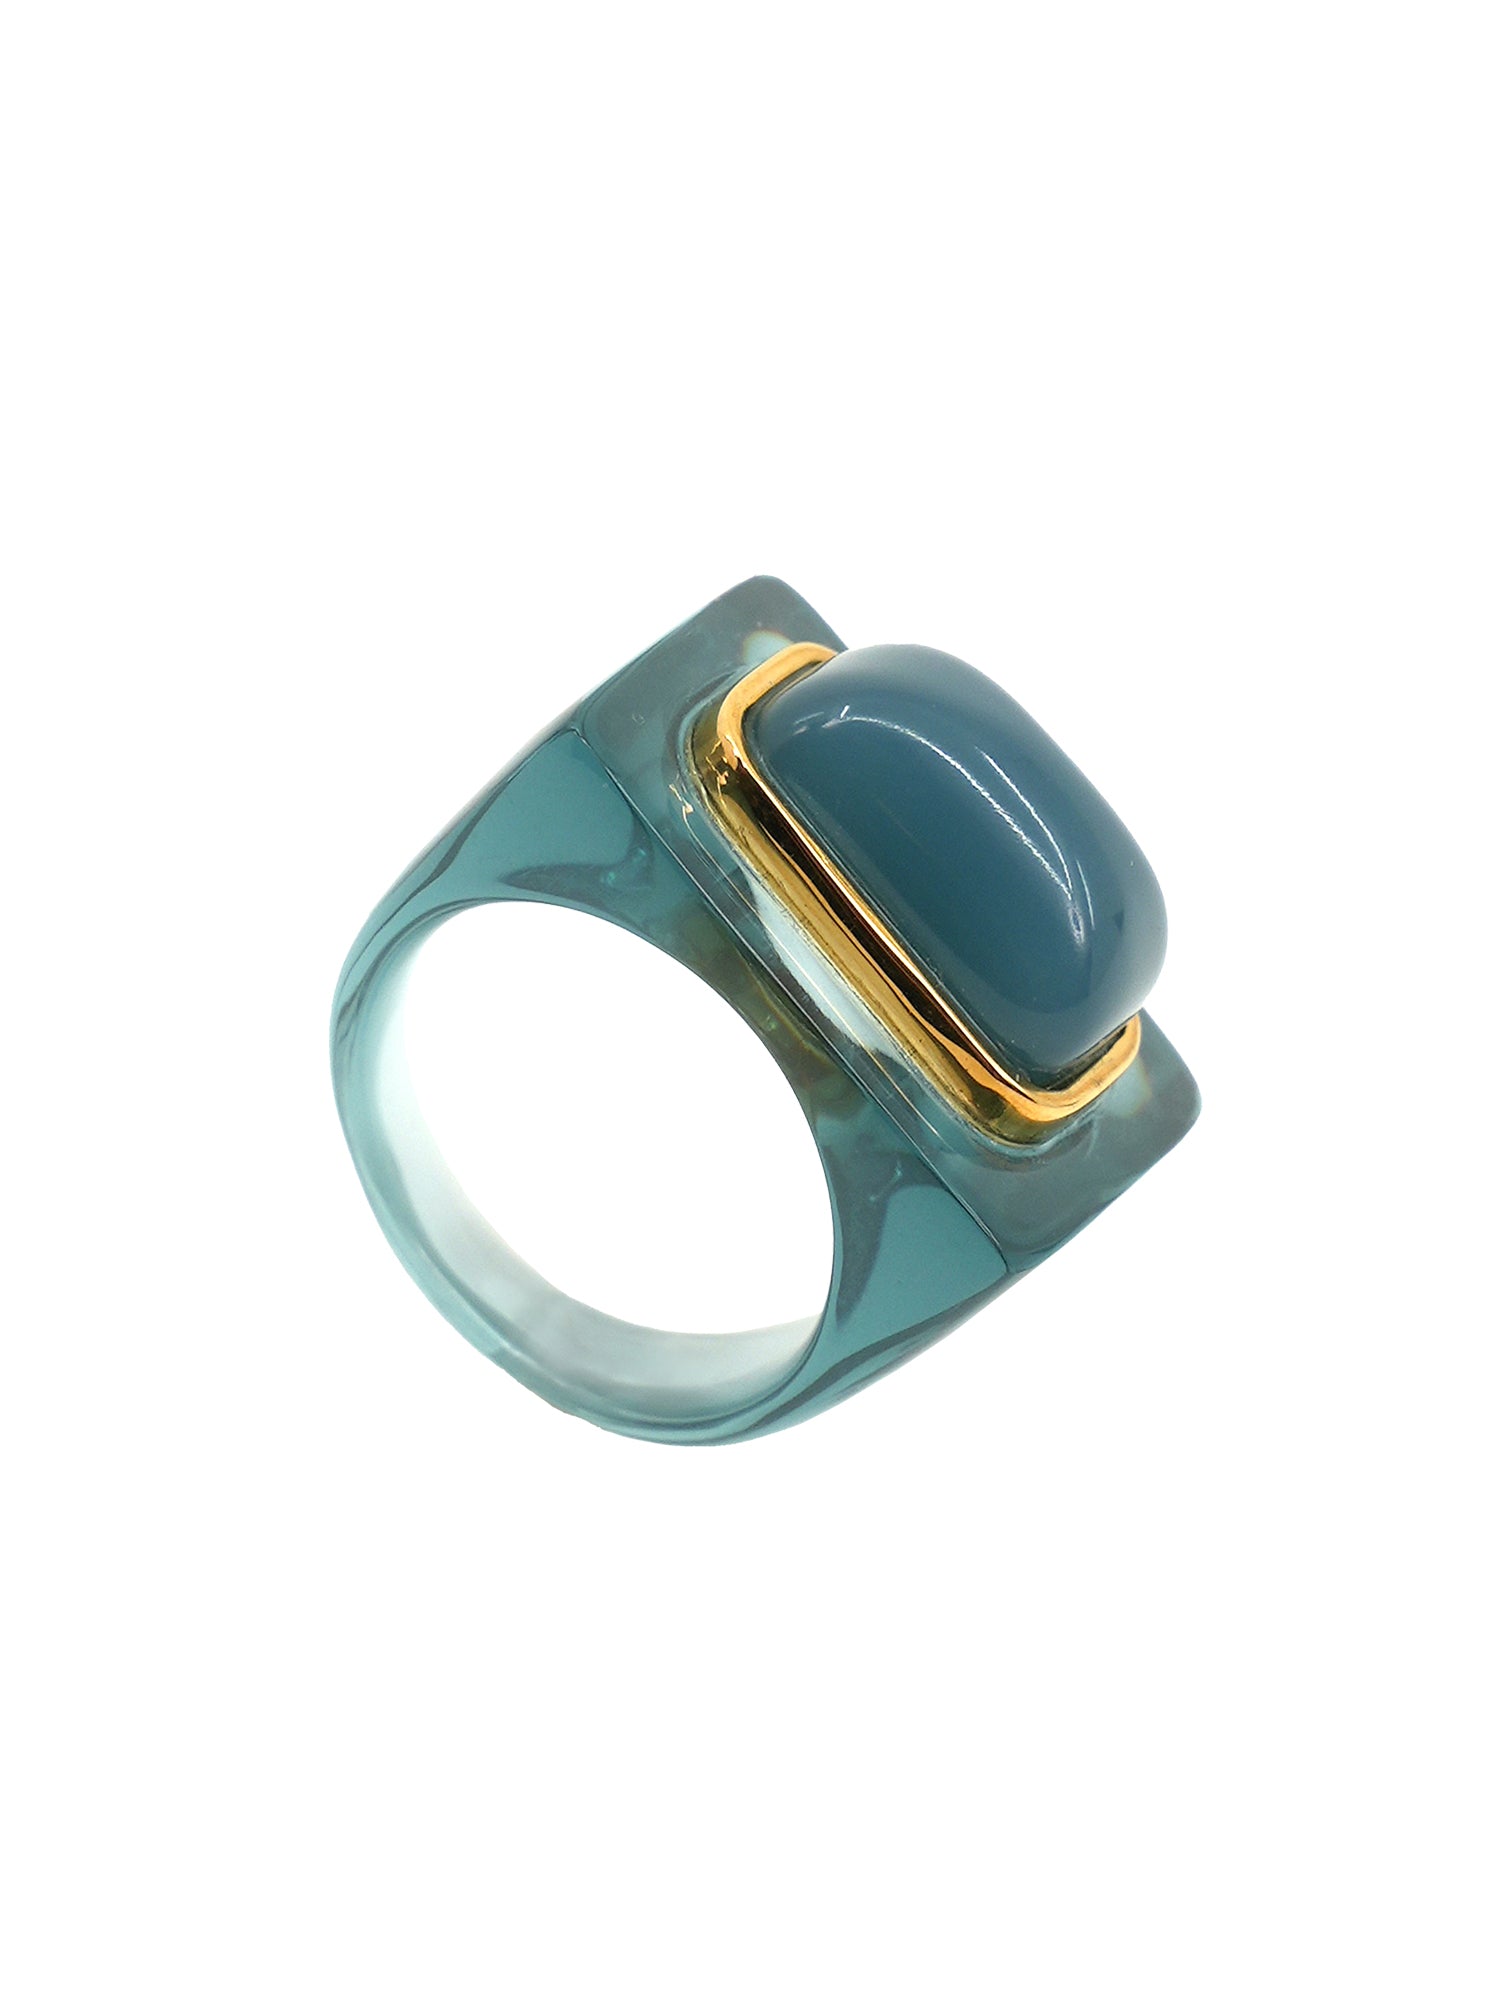 Resin Ring with Resin Stone - Deep Blue / Aqua